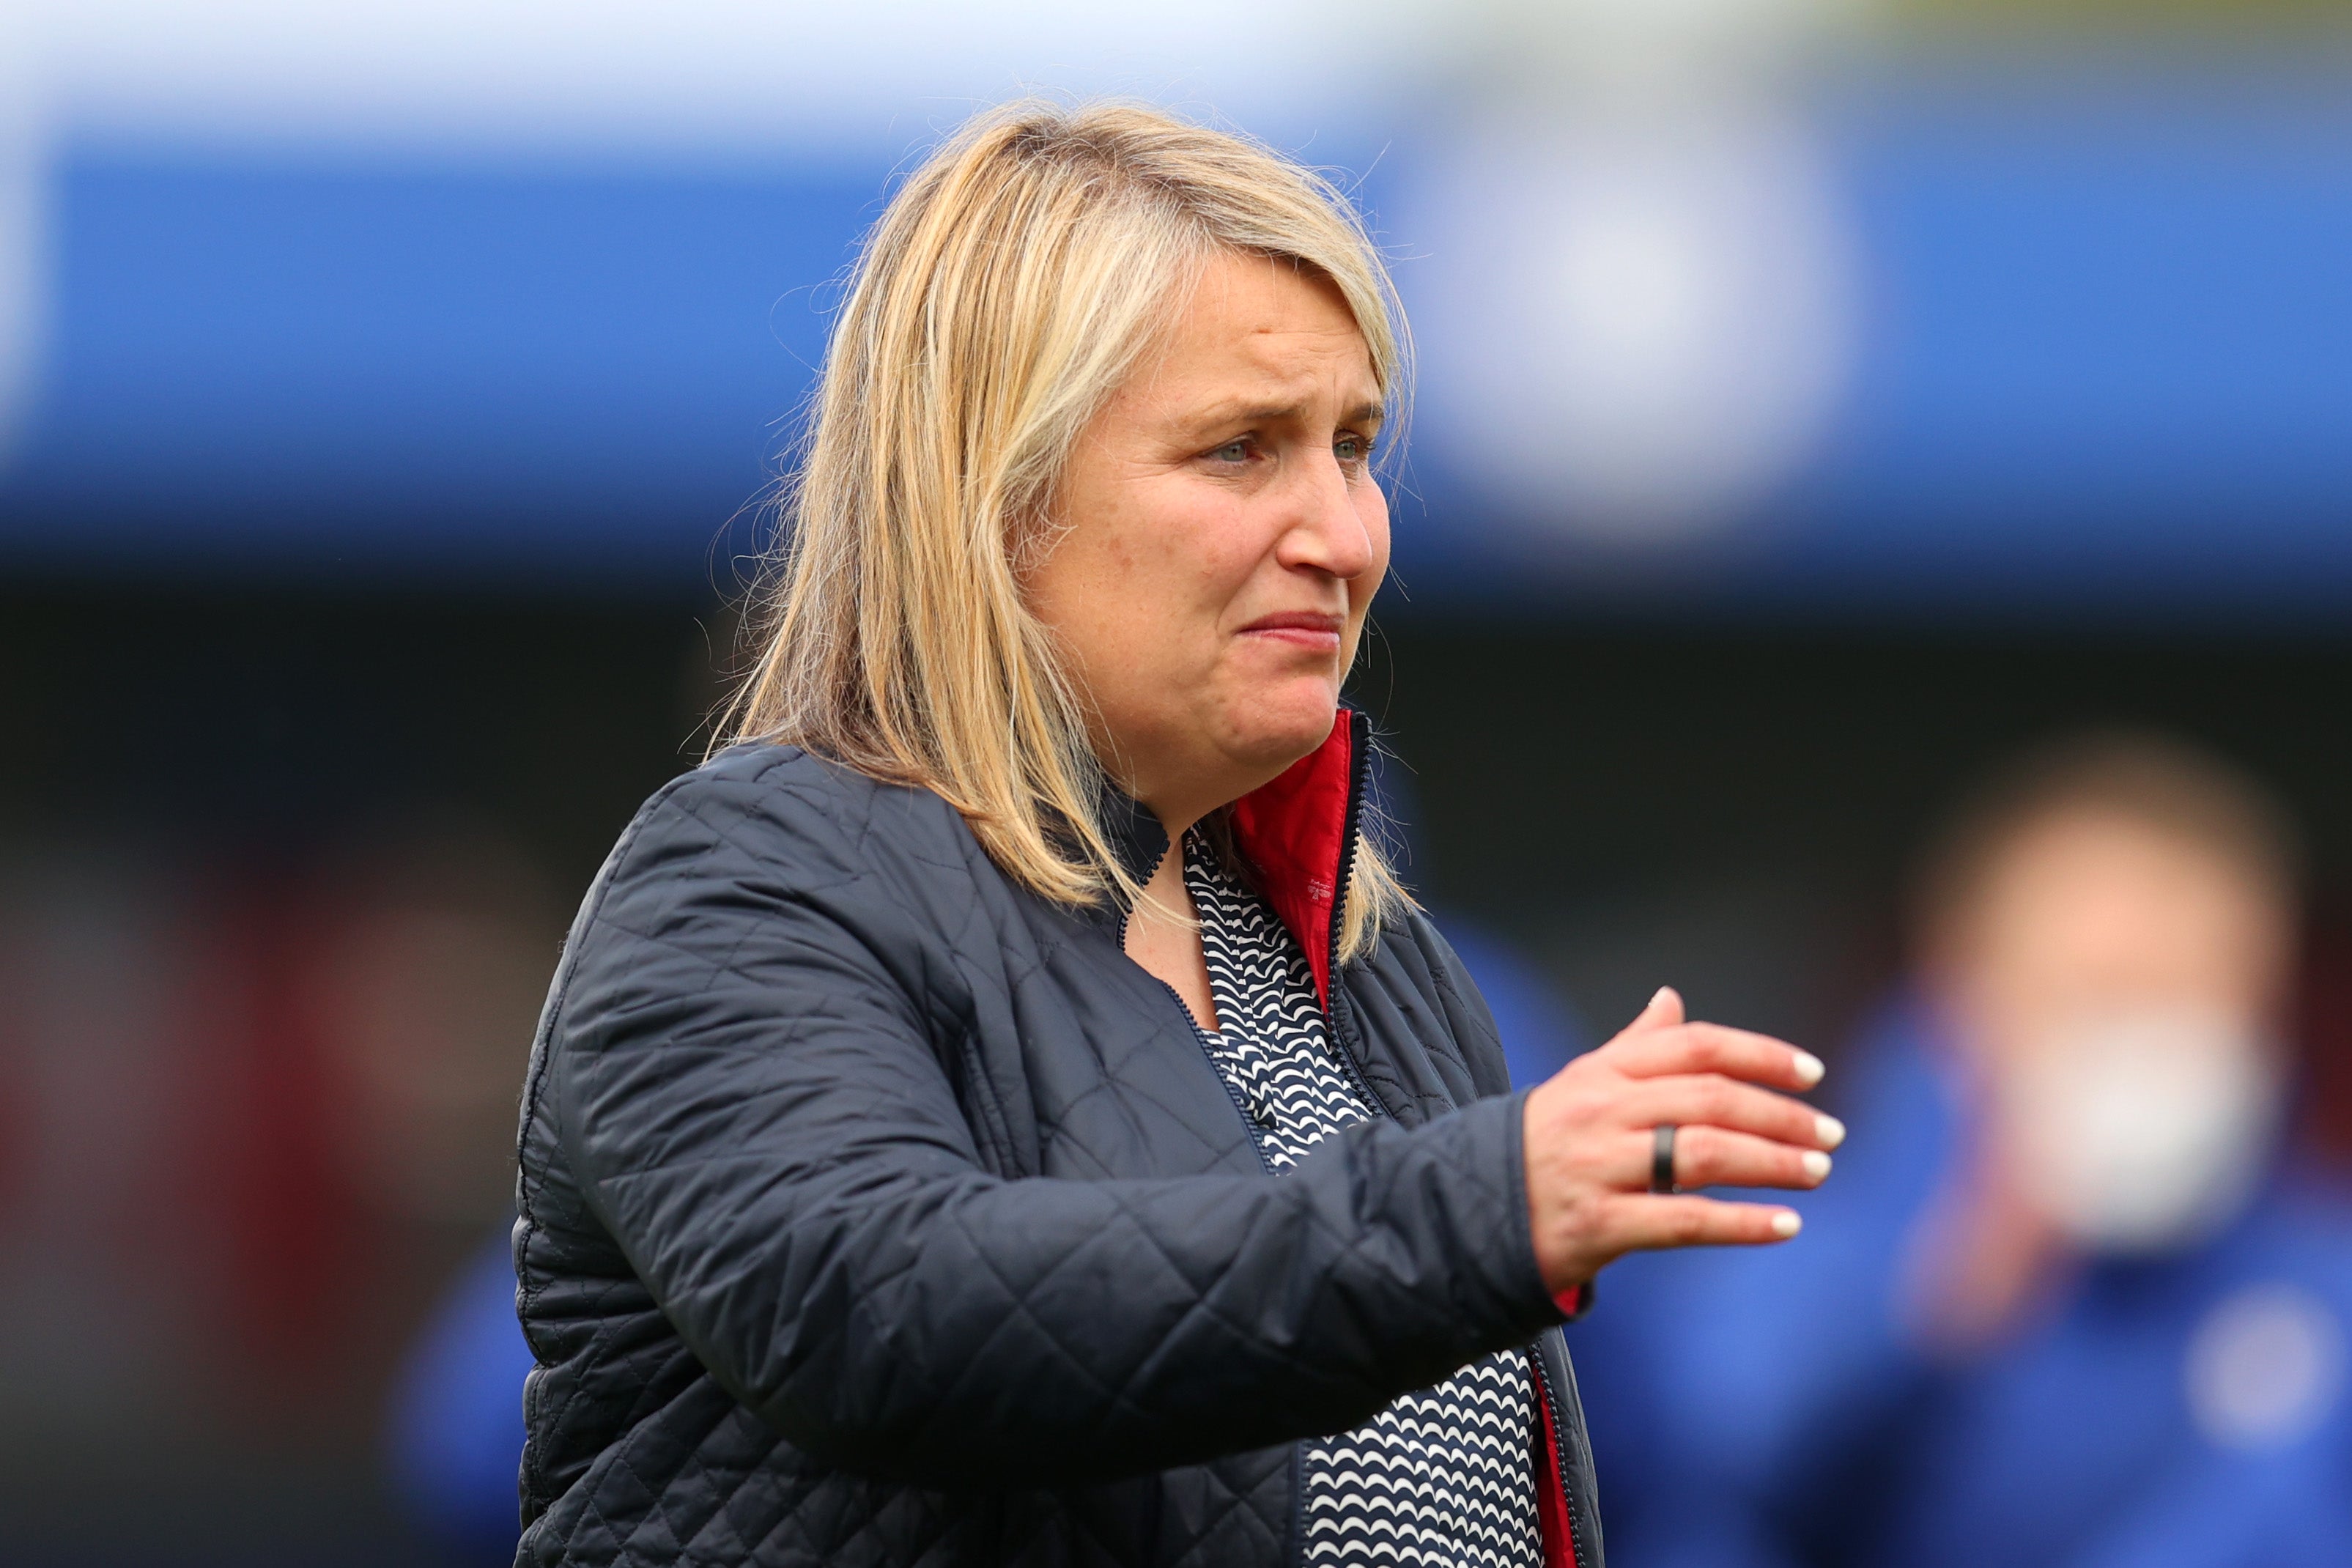 Emma Hayes was in tears after Chelsea held on to defeat Bayern Munich on Sunday